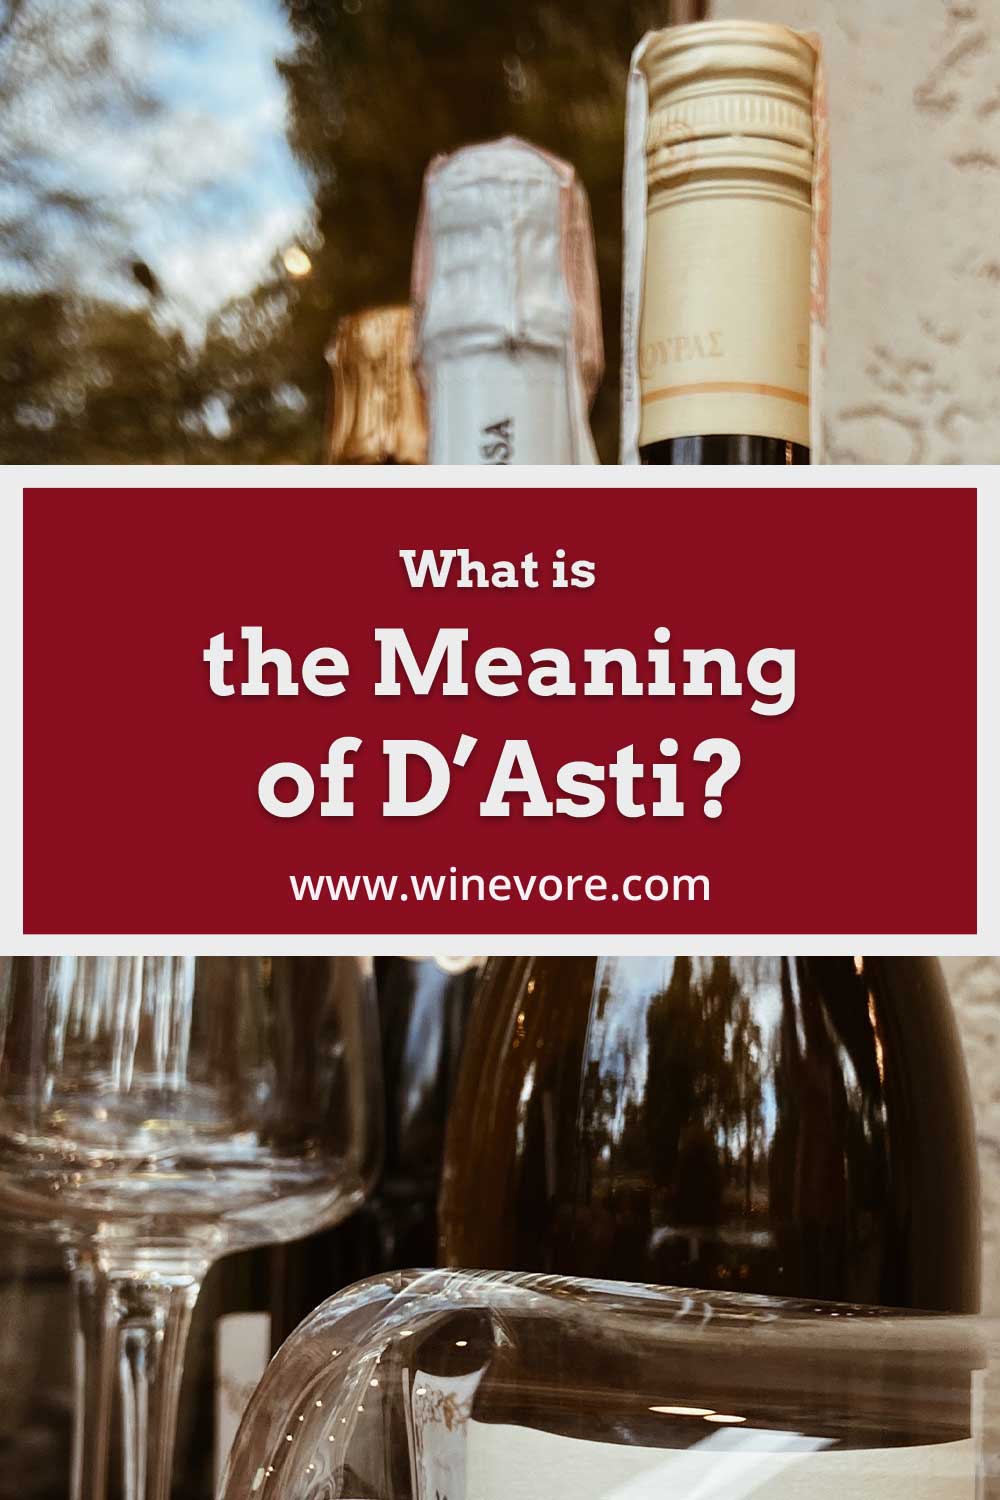 Wine glasses and bottles - What is the Meaning of D’Asti?